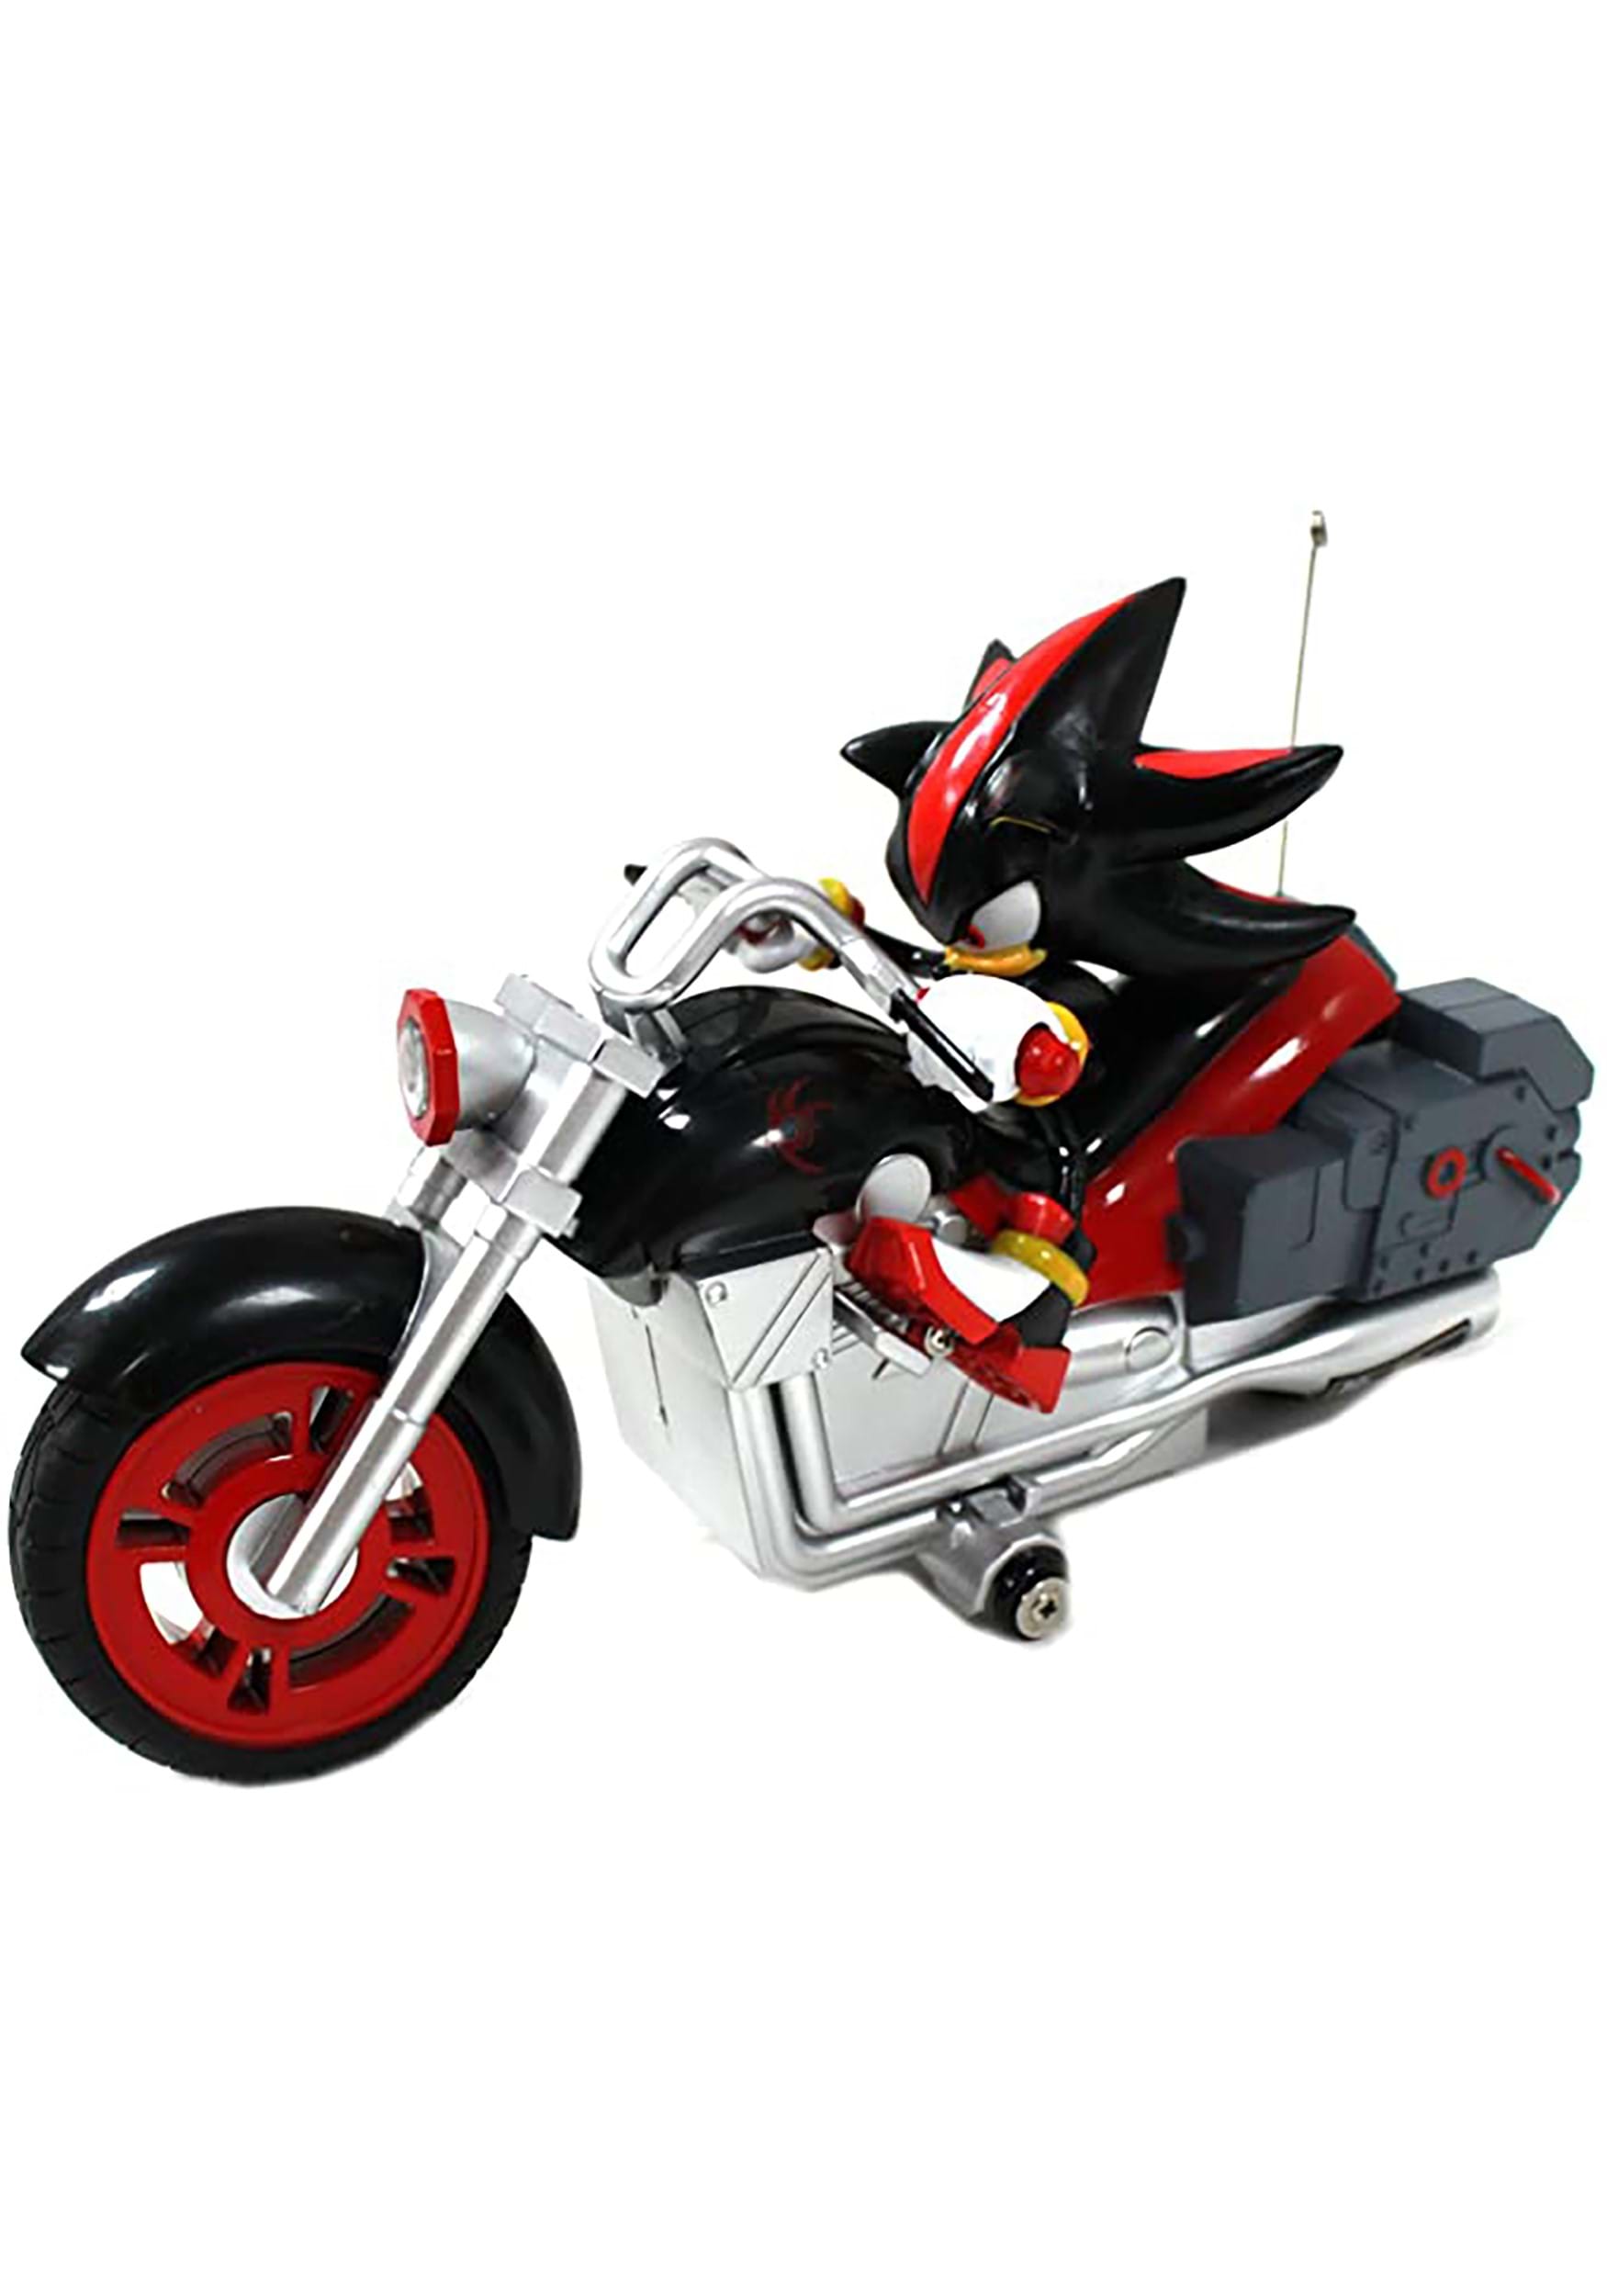 shadow the hedgehog with motorcycle